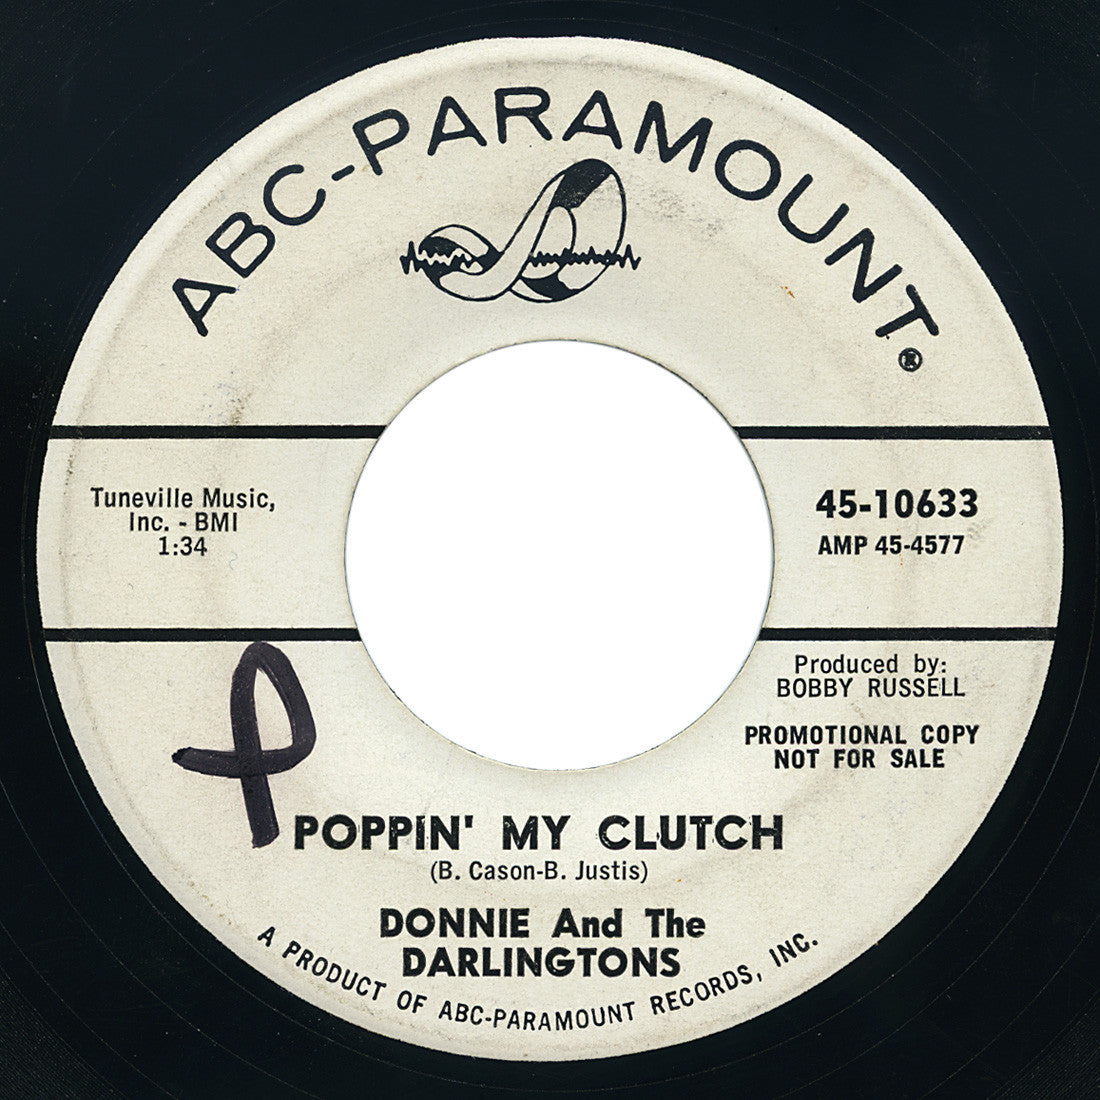 Donnie And The Darlingtons – Poppin’ My Clutch – ABC-Paramount